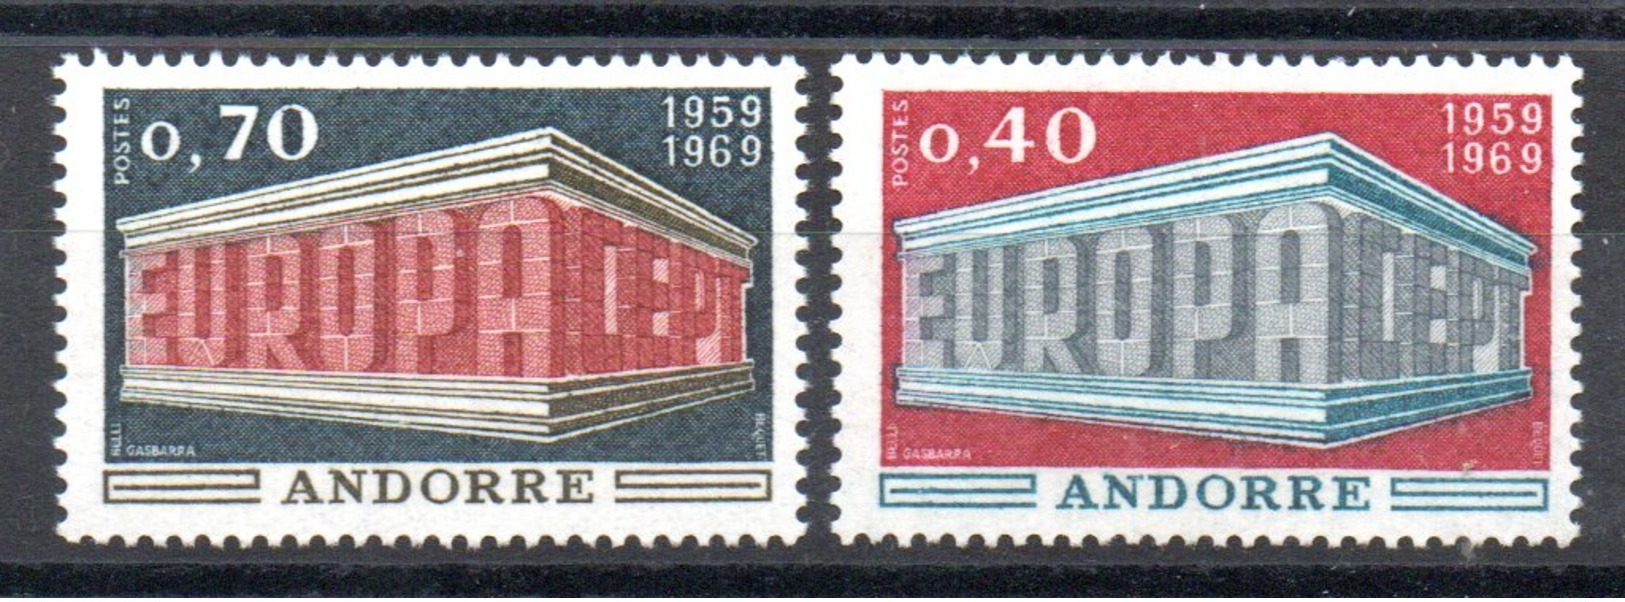 ANDORRE - YT N° 194-195 - Neufs ** - MNH - Cote: 40,00 € - Europa 1969 - Unused Stamps